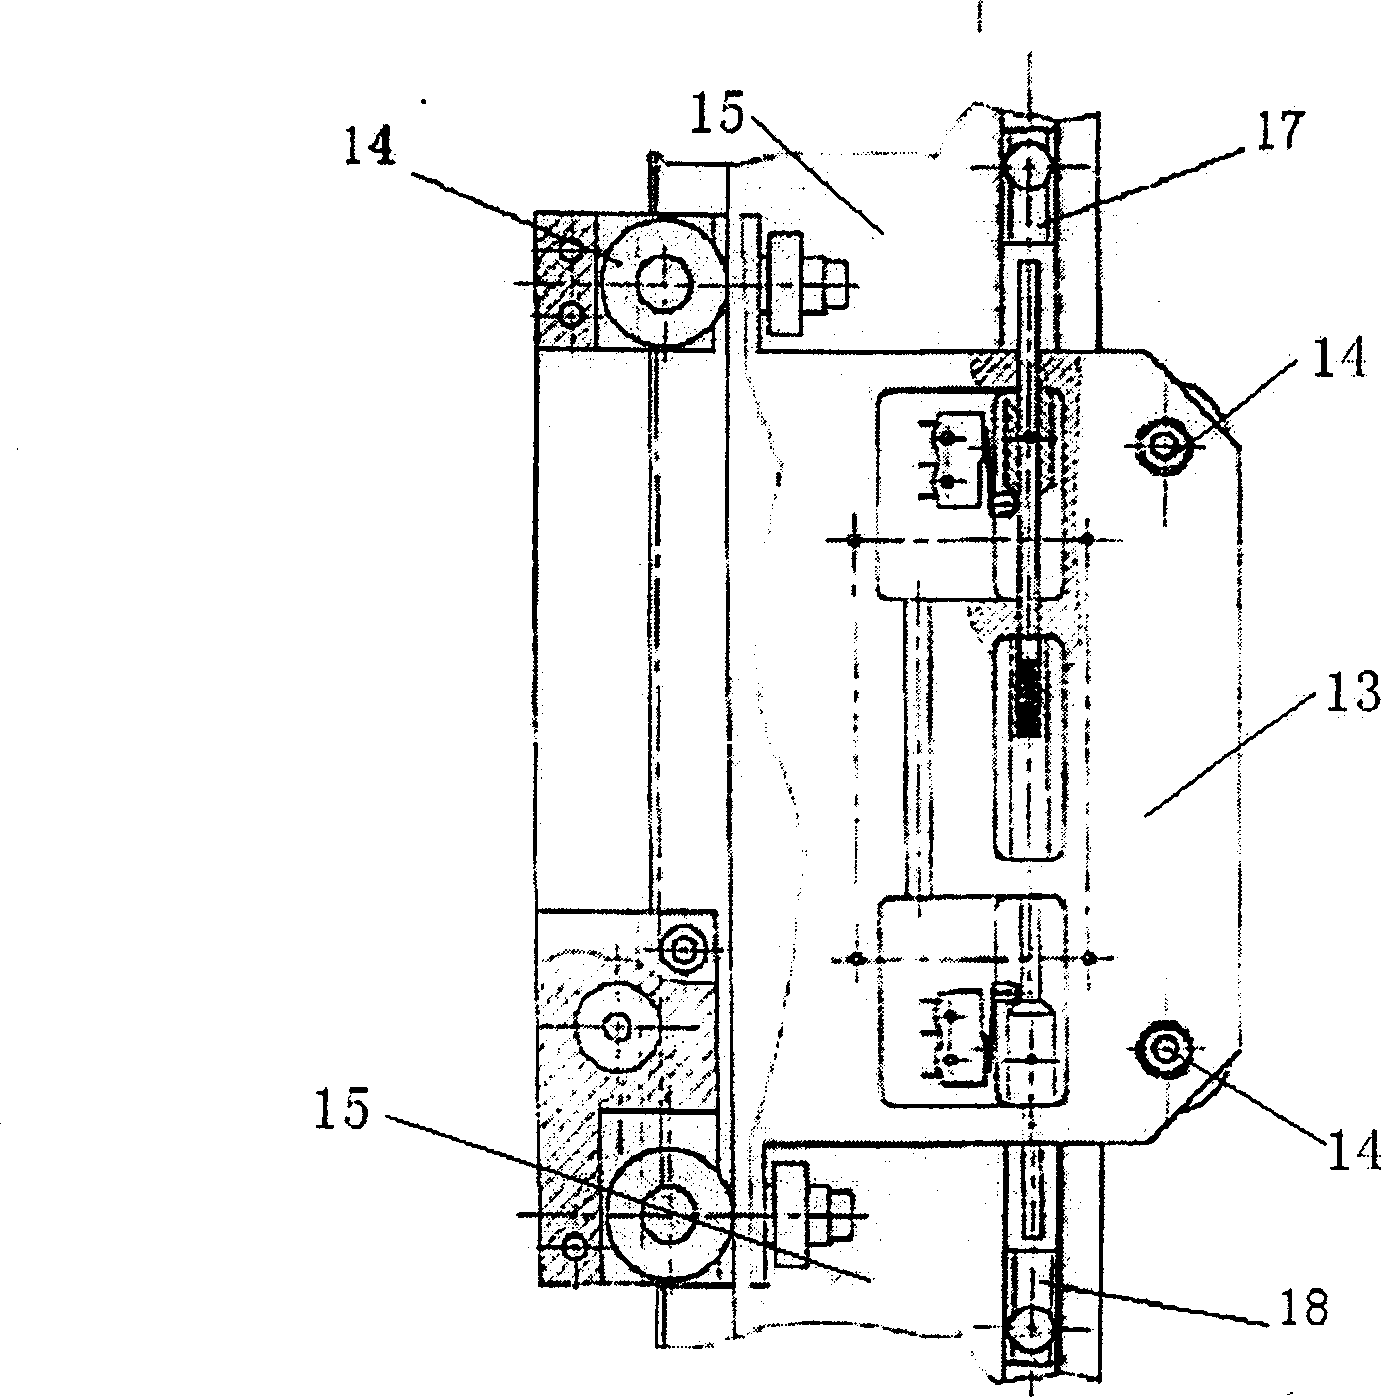 Composite sensor for synchronous real-time measuring three parameters and measuring apparatus